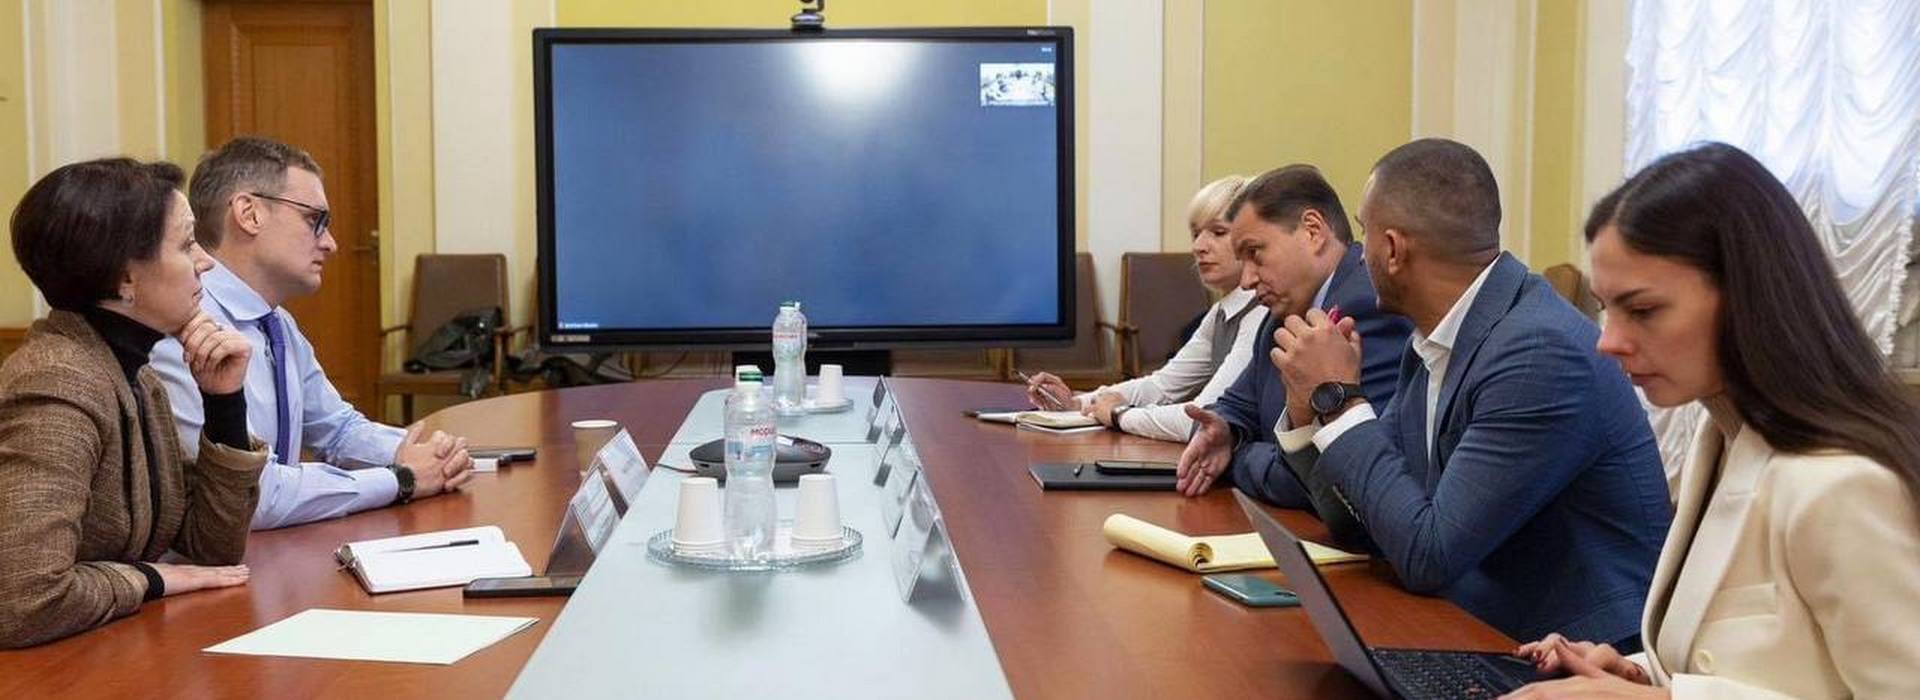 Meeting with Andriy Smyrnov, Deputy Head of the Office of the President of Ukraine